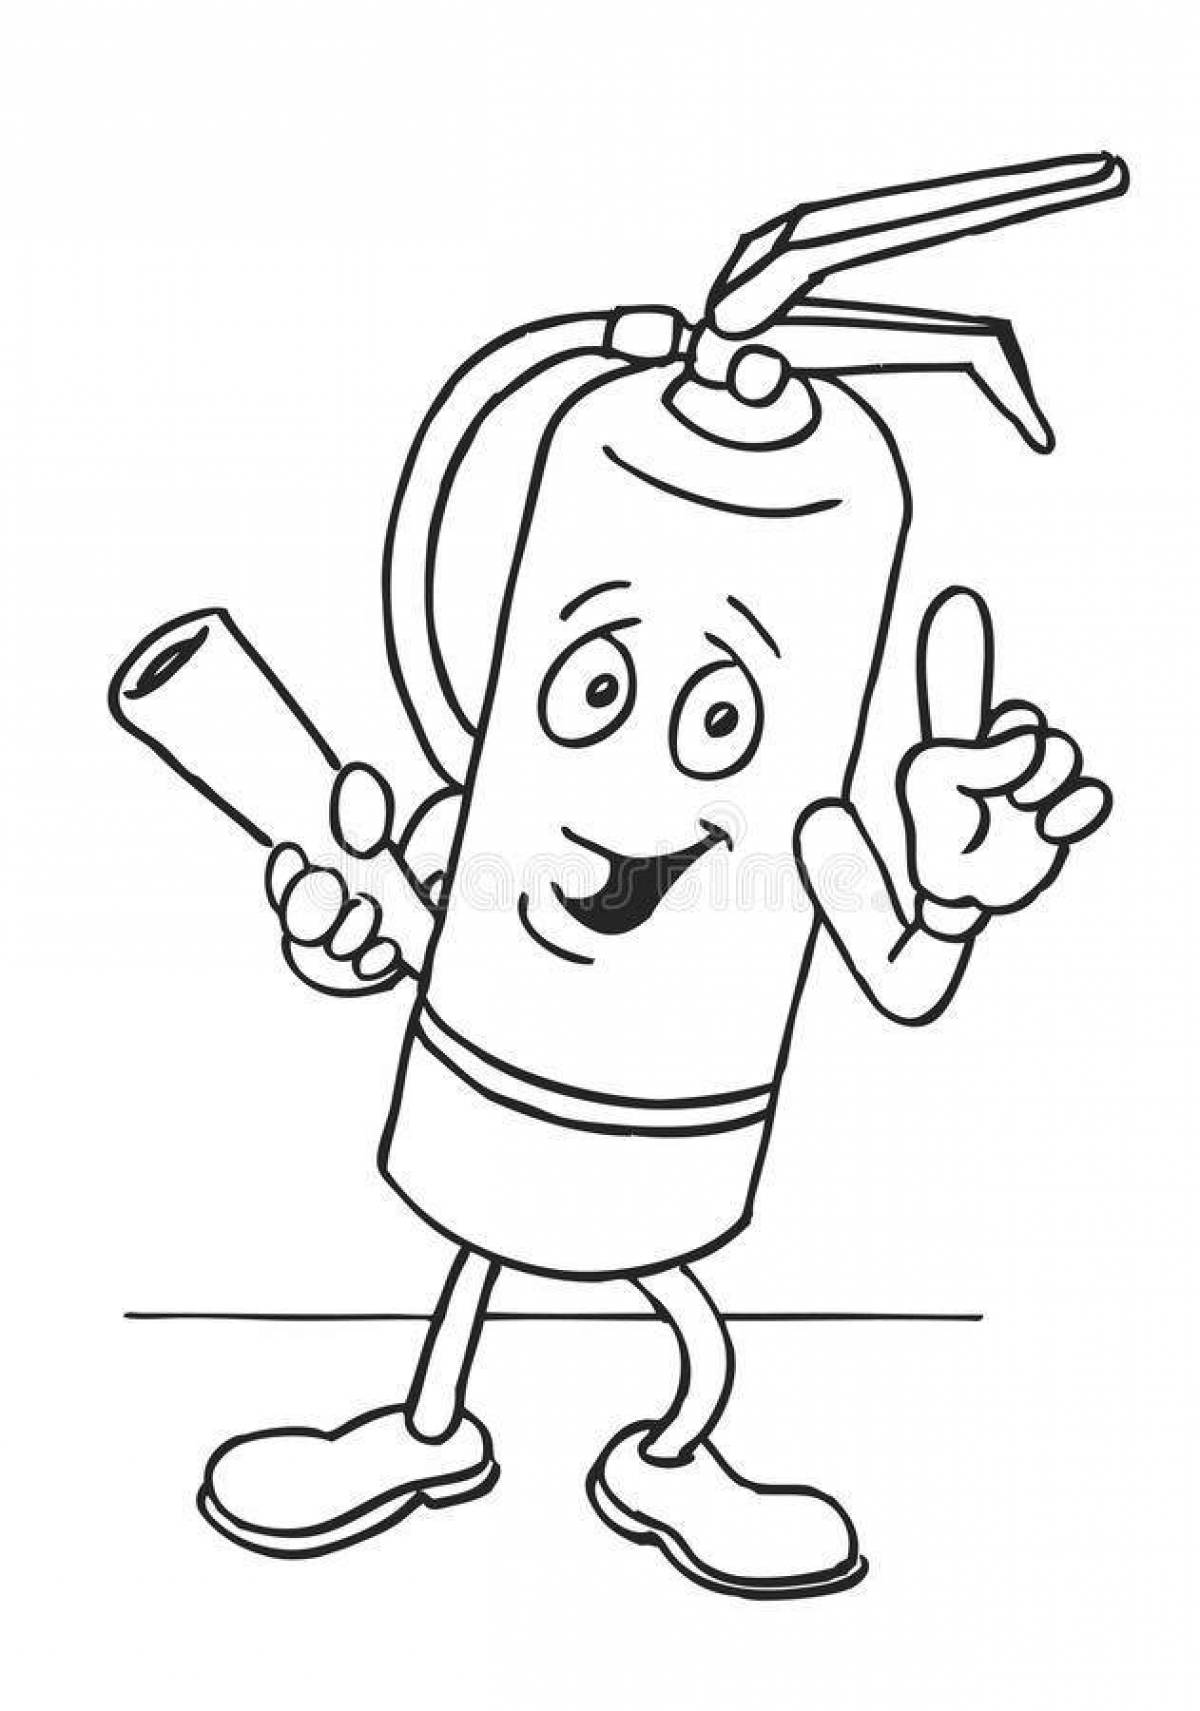 Amazing fire extinguisher coloring page